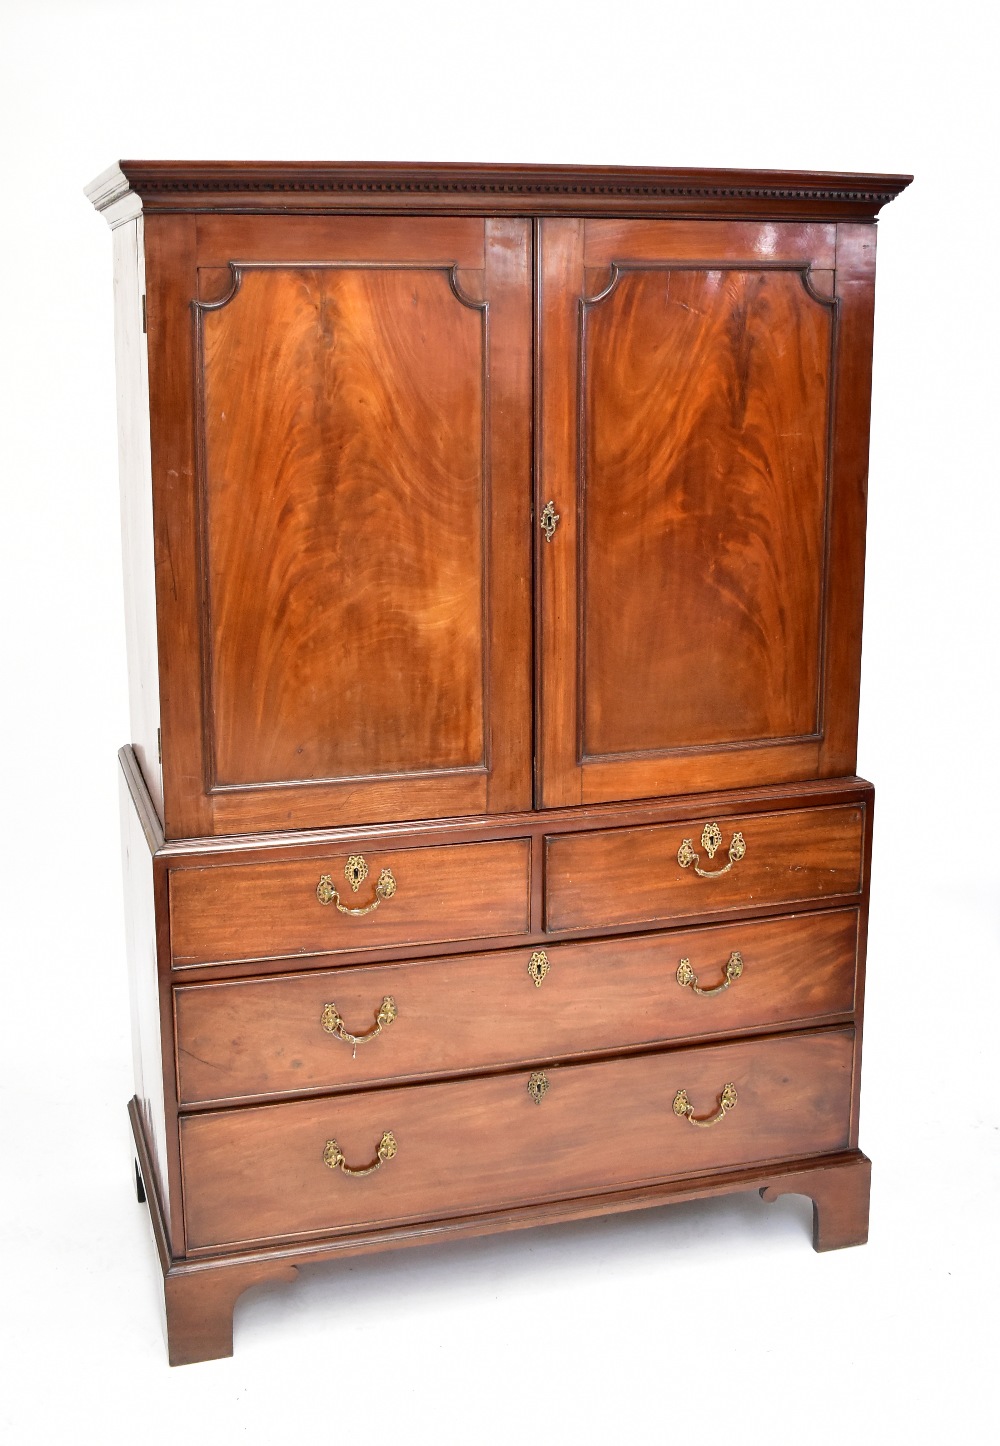 A George III mahogany linen press, the top section with two panelled doors enclosing two drawers